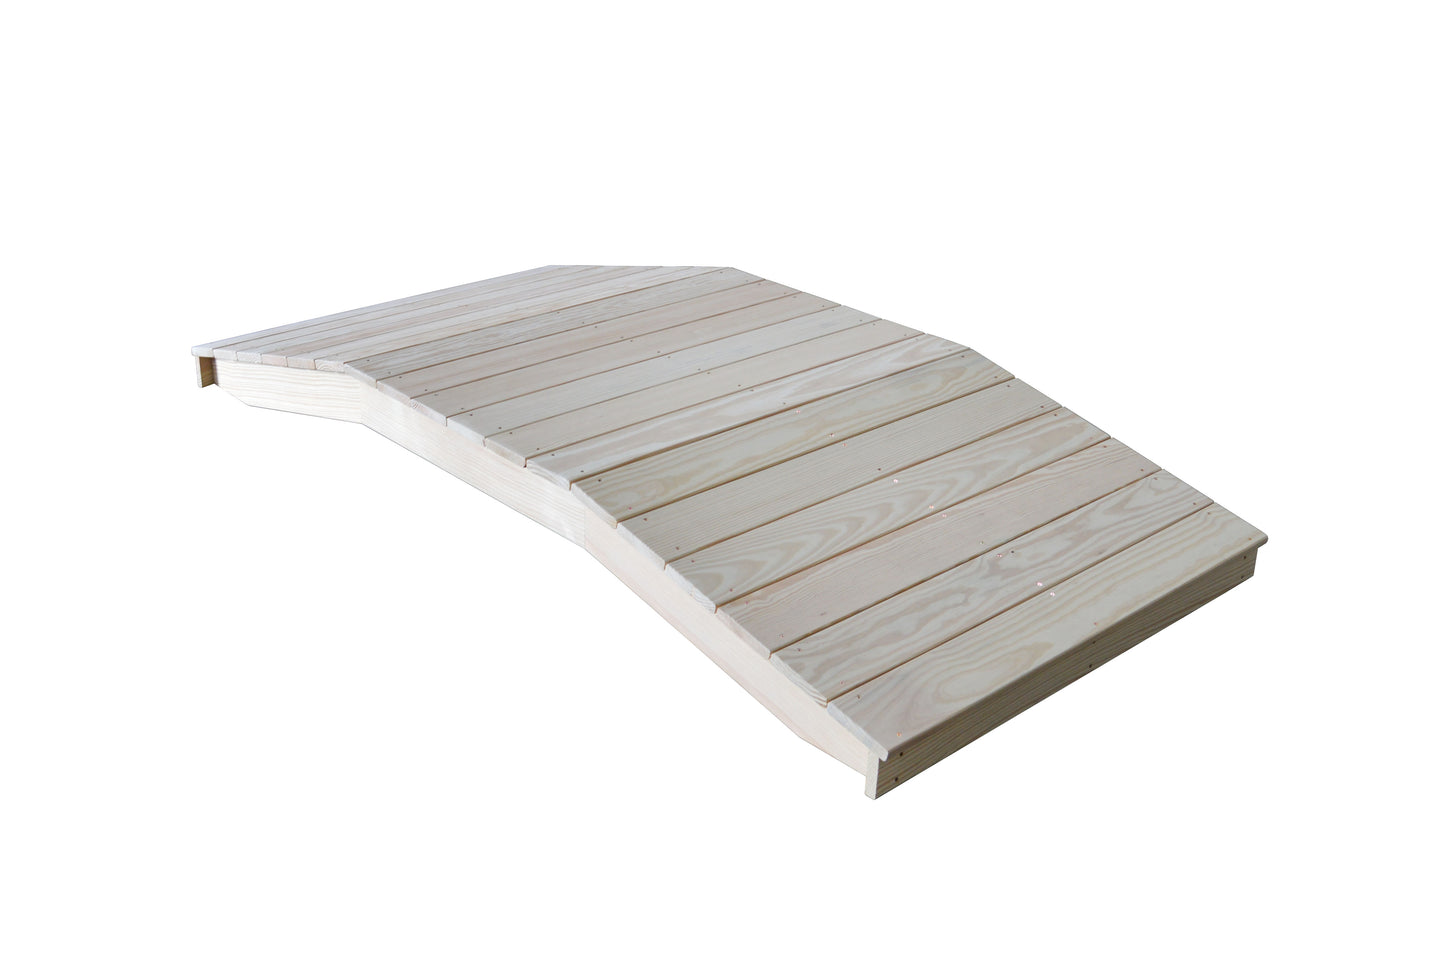 A&L Furniture Pressure Treated Pine 4' x 8' Standard Plank Bridge - LEAD TIME TO SHIP 10 BUSINESS DAY